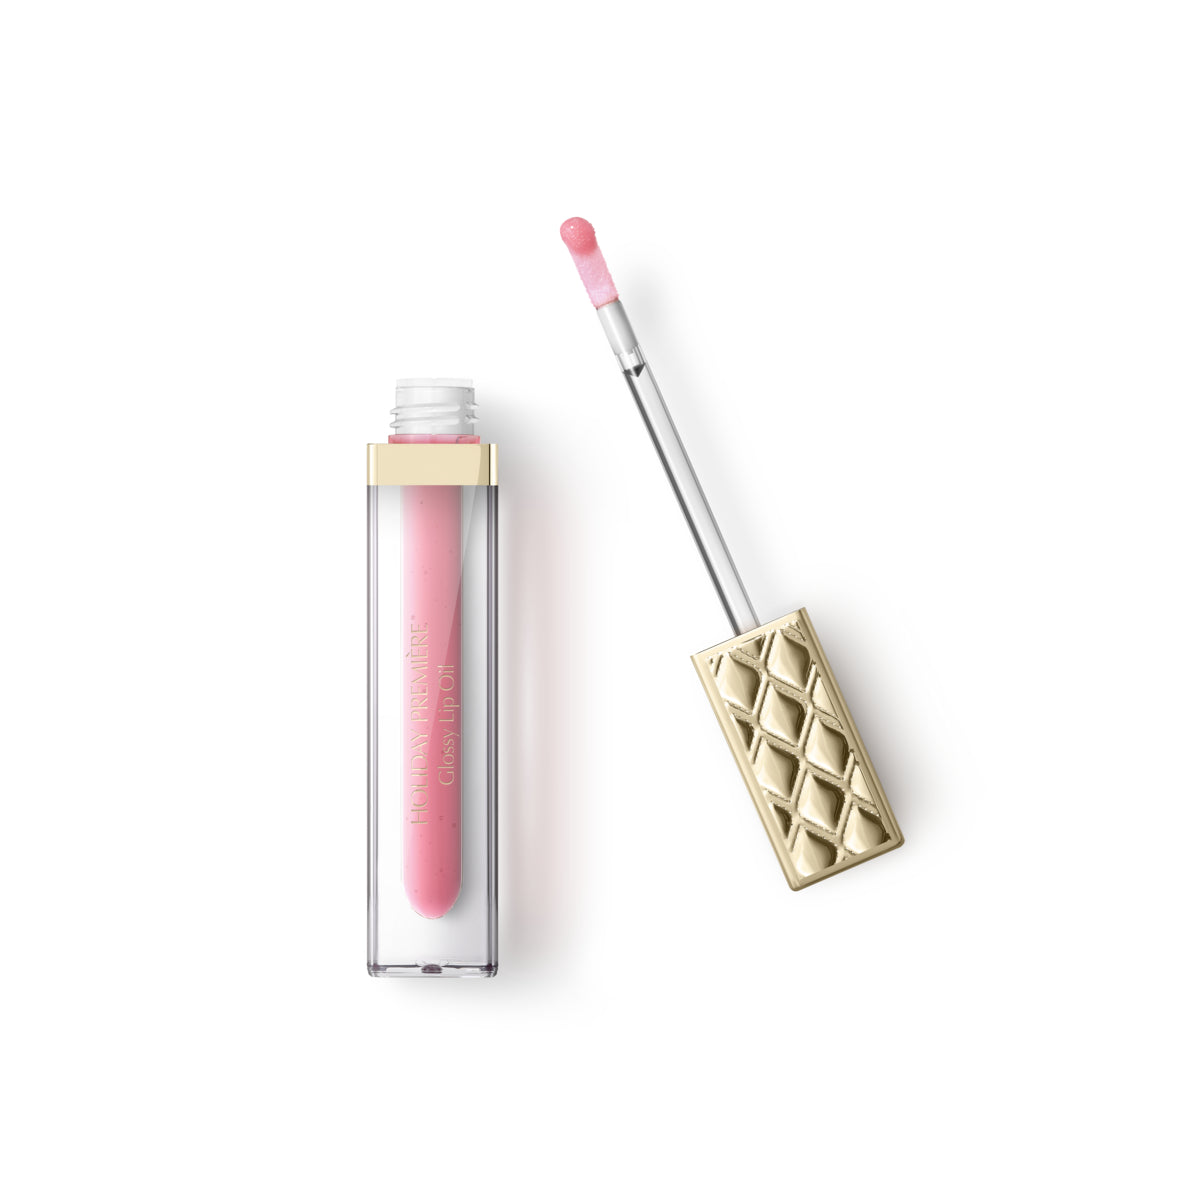 Holiday Première Glossy Lip Oil